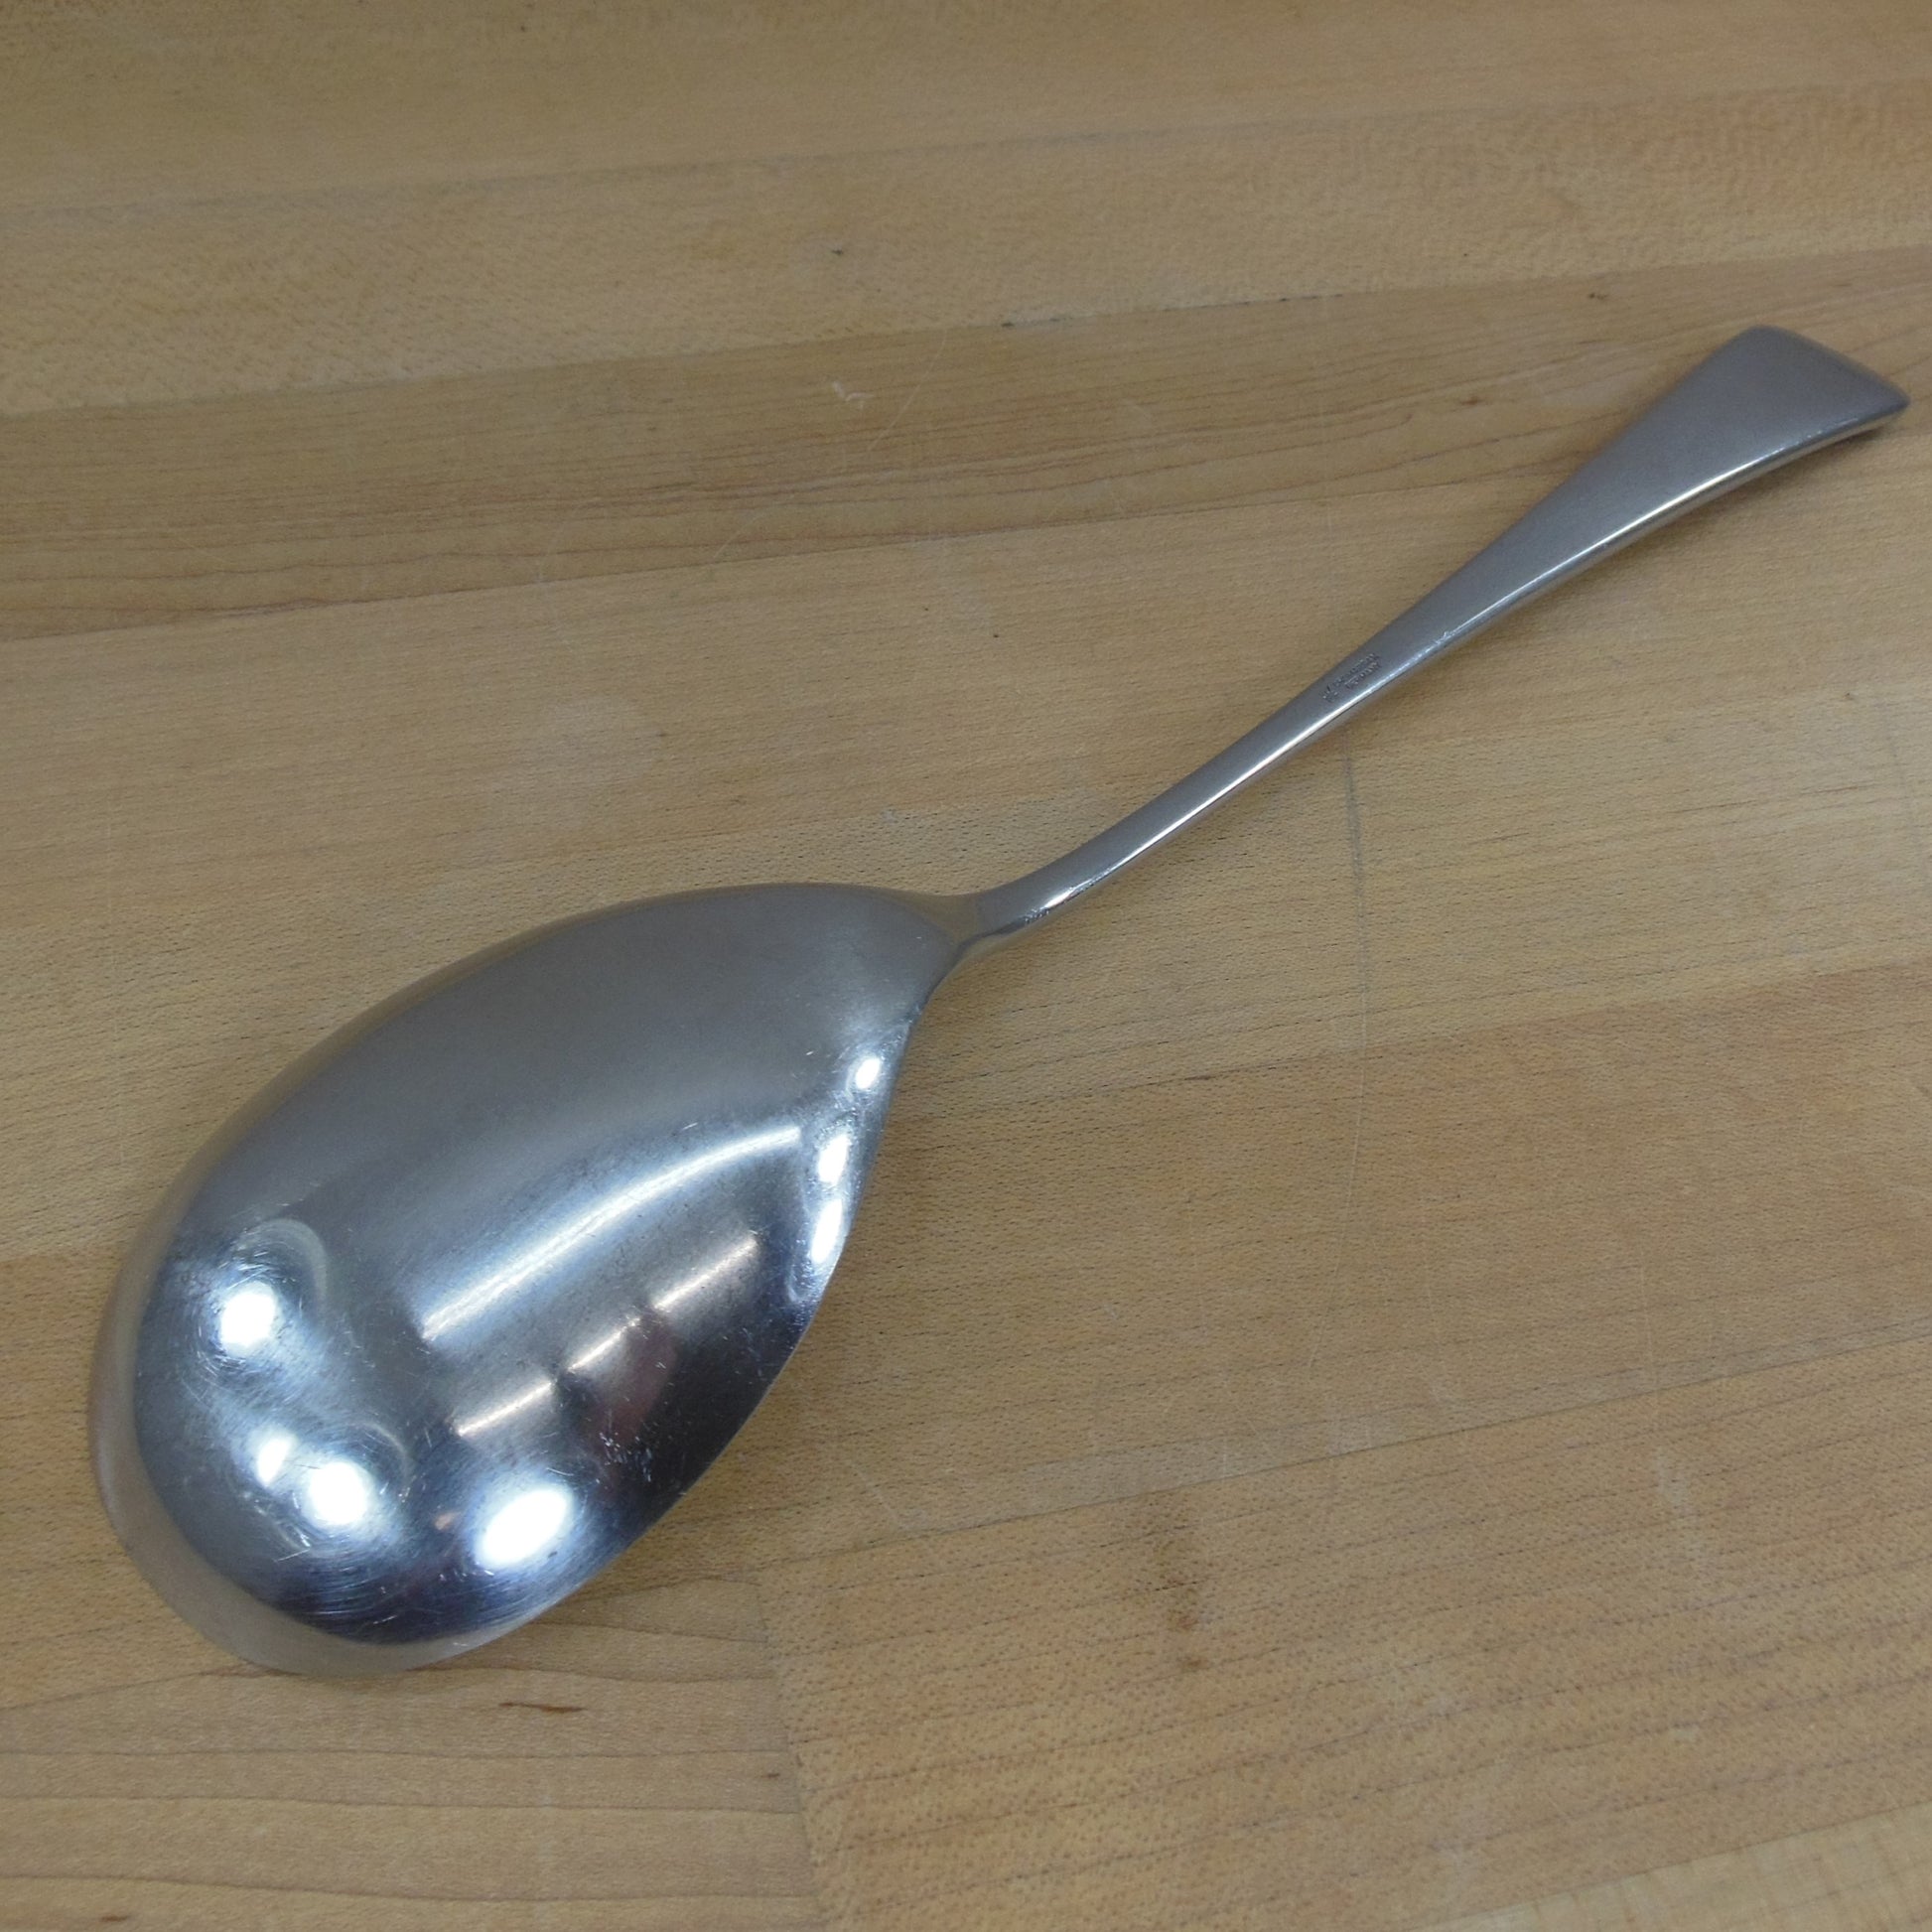 WMF Germany Cromargan Stainless Finesse Flatware - Salad Serving Spoon Used